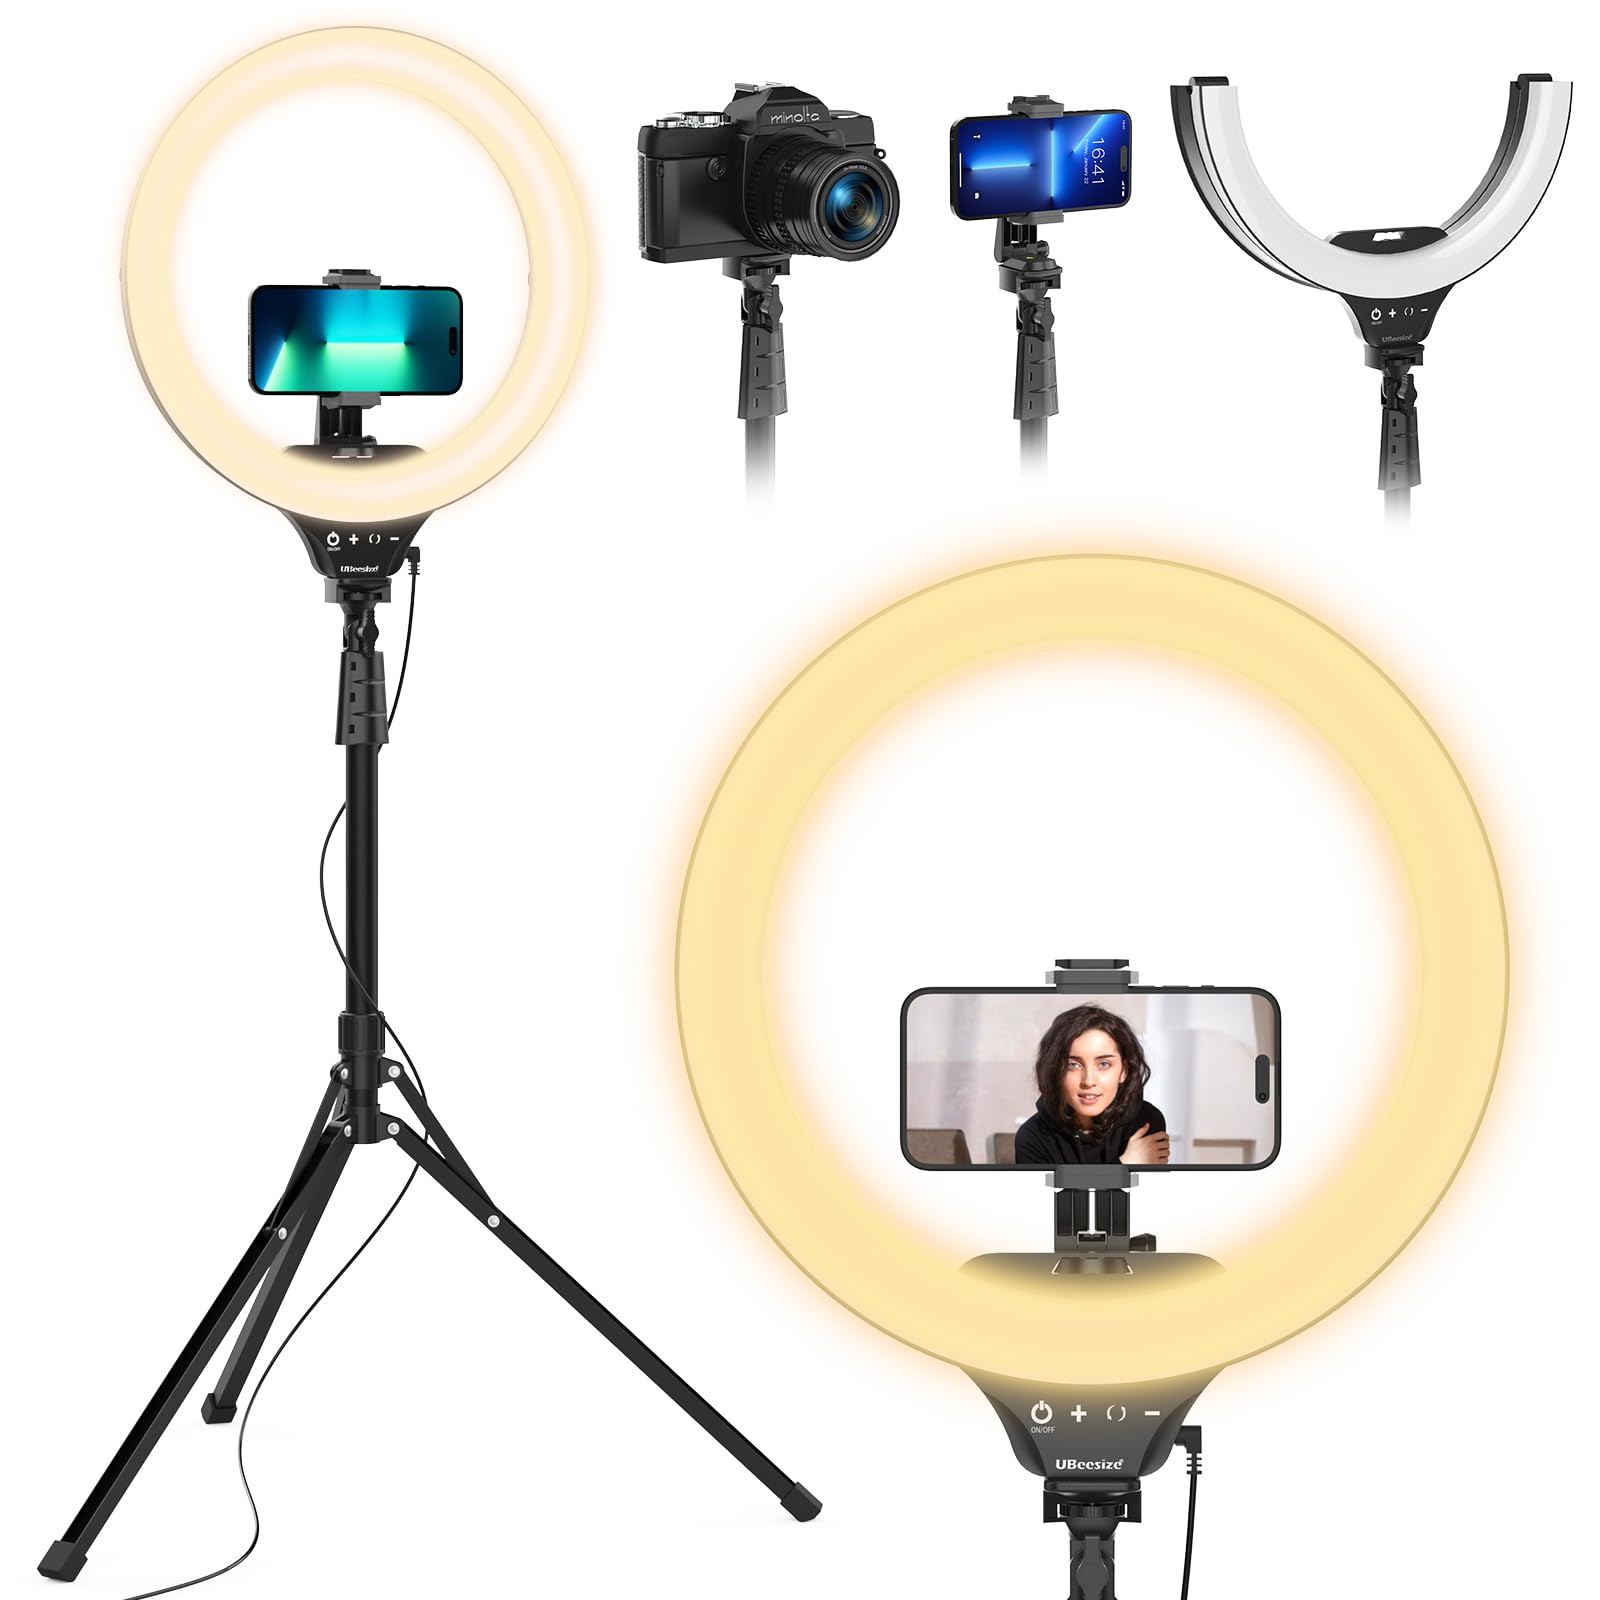 UBeesize 14'' Foldable Ring Light with 62'' Tripod Stand and Phone Holder, LED Selfie RingLight for iPhone with Remote, Circle Light for Tiktok/YouTube/Photography/Makeup/Live Stream